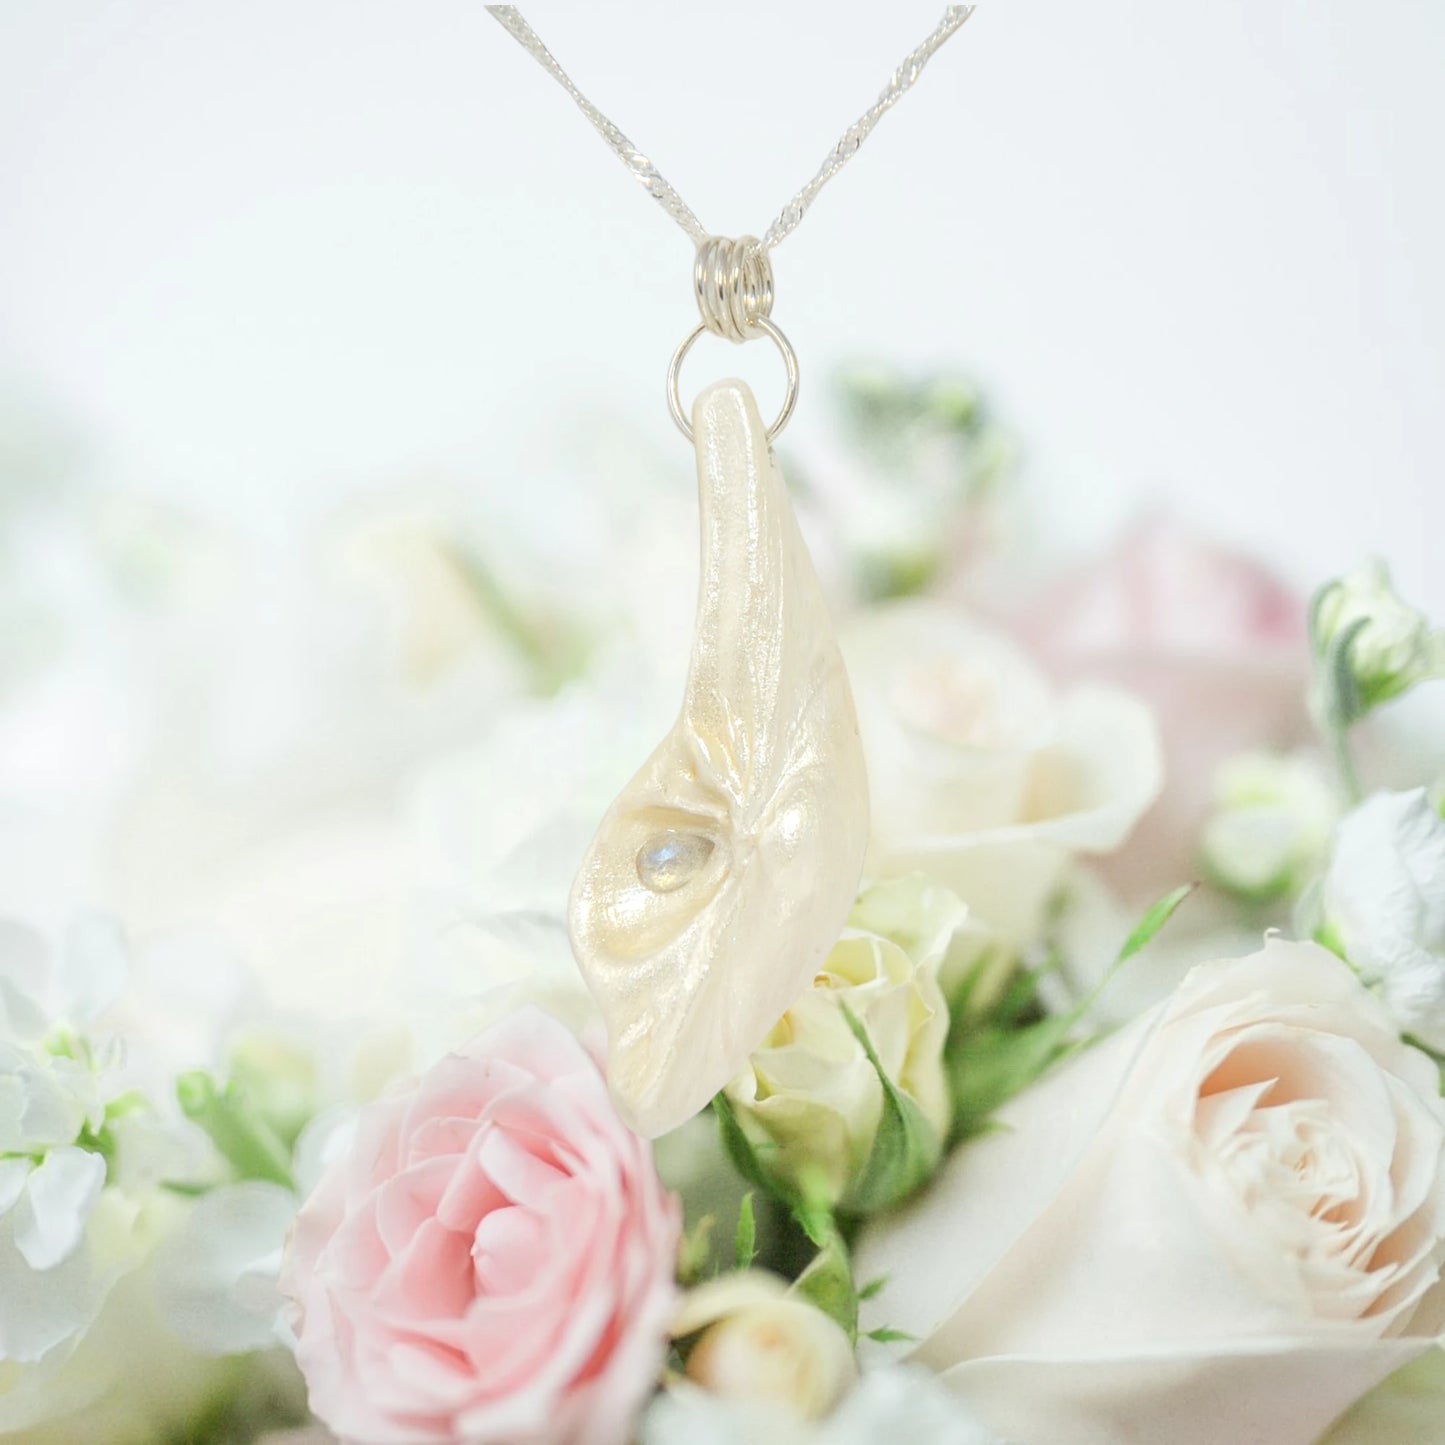 Cool Summer pendant made of natural seashell with a tear drop shape rose cut labradorite gemstone. The pendant is hanging by a chain over a bouquet of pink and white roses.